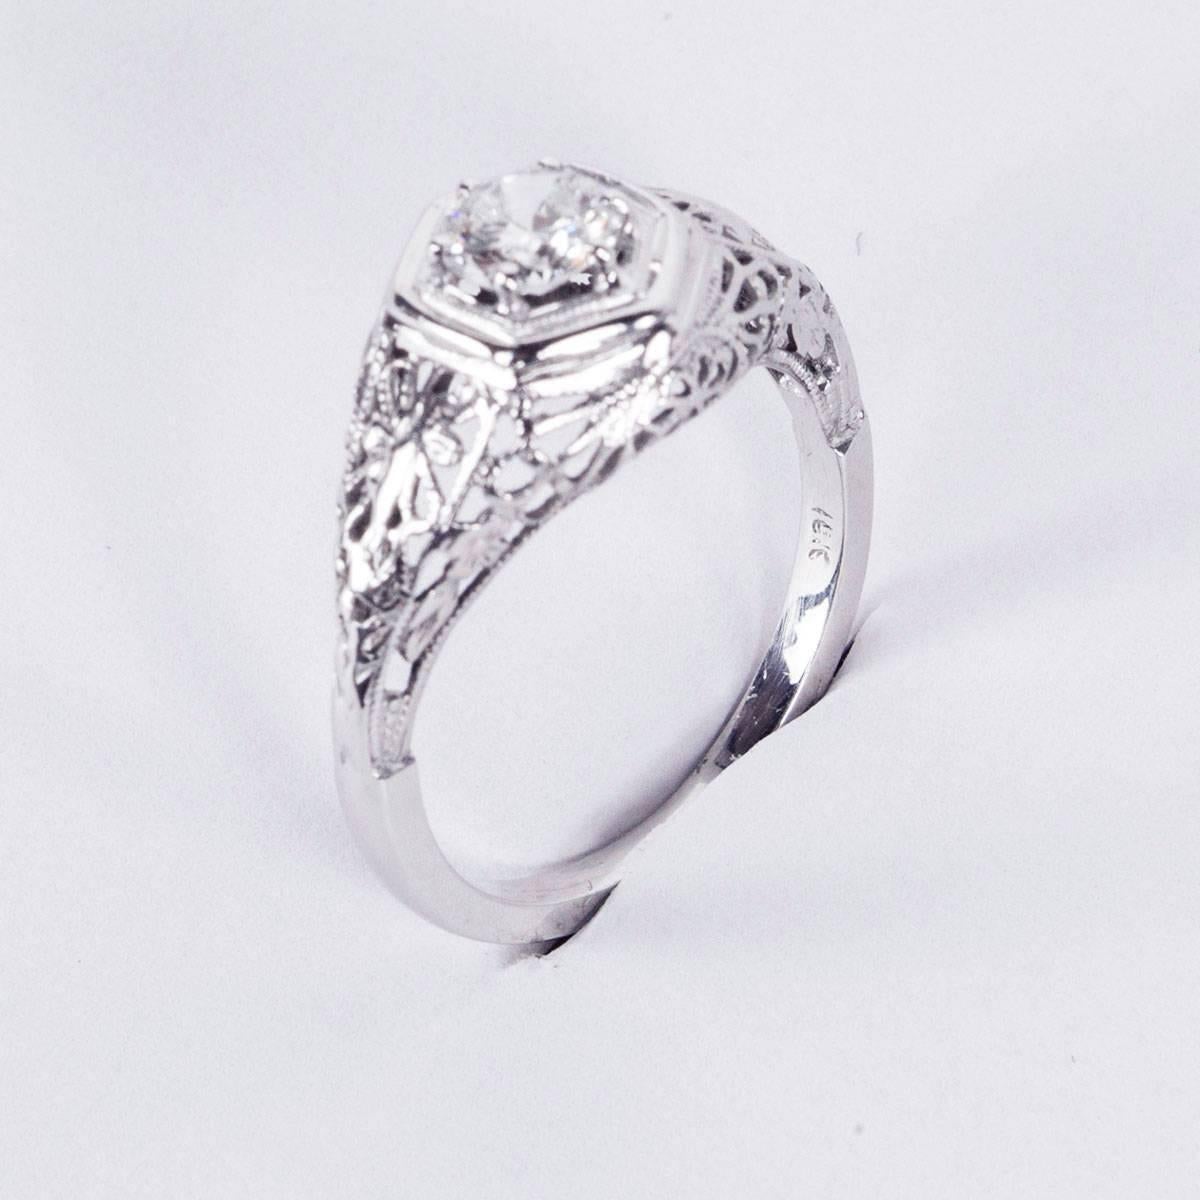 Beautiful Art Deco Diamond Engagement Ring centering a Brilliant cut Diamond, approx. 0.45 carat; wonderful H color and VS2 clarity, milgrain setting; shank is 18K and top mounting in platinum featuring elaborate chase work, making it a Special and